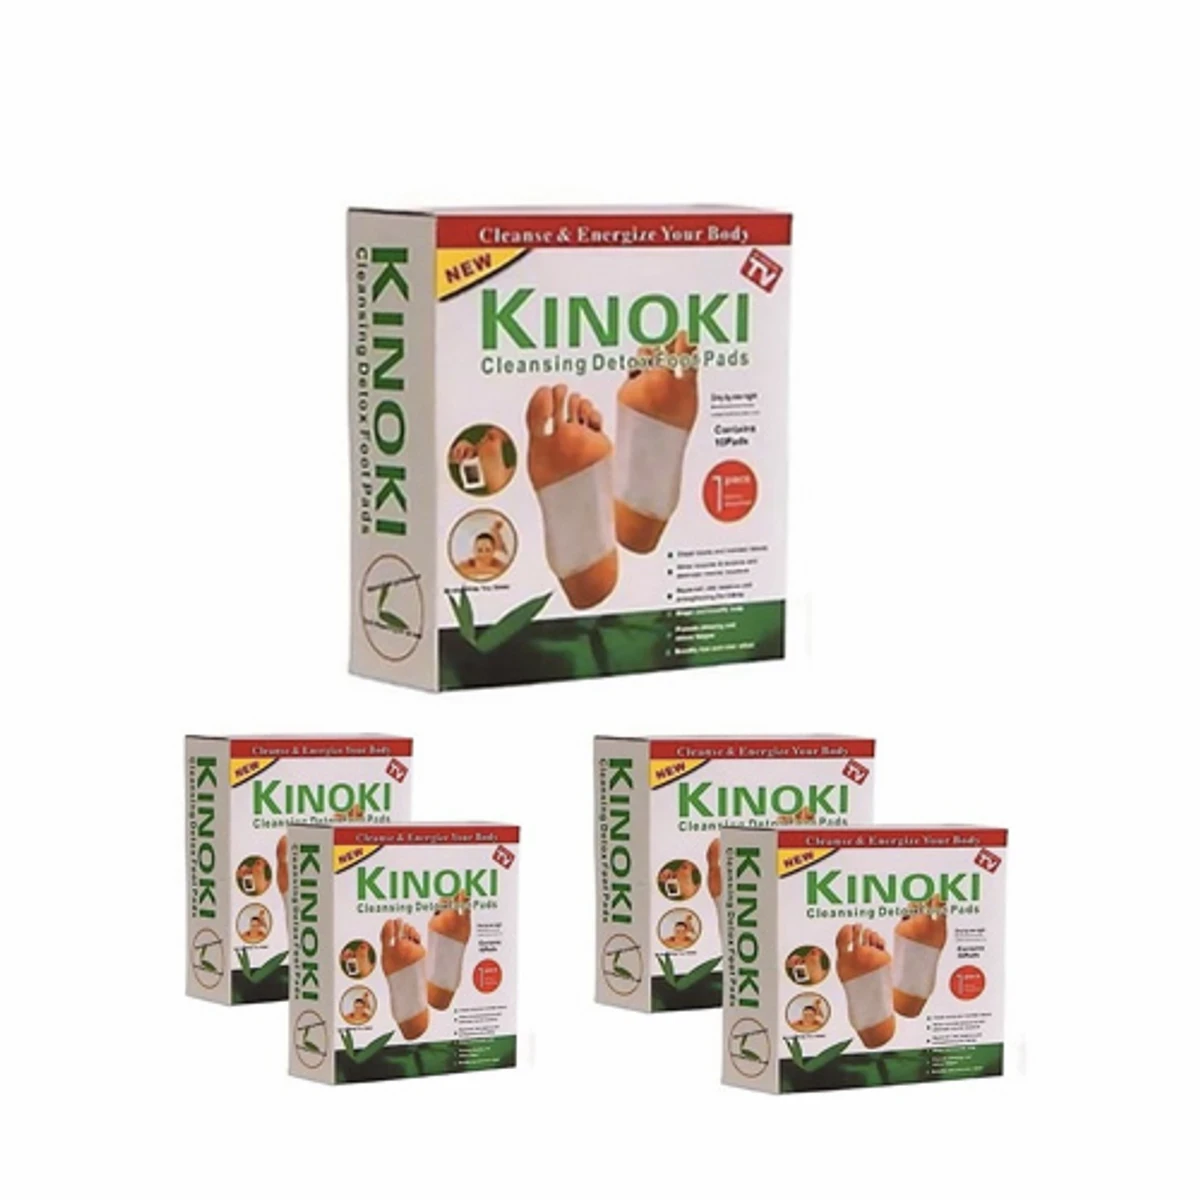 Full Course 5 Pack Kinoki Detox Foot Pads( Free Delivery Charge )